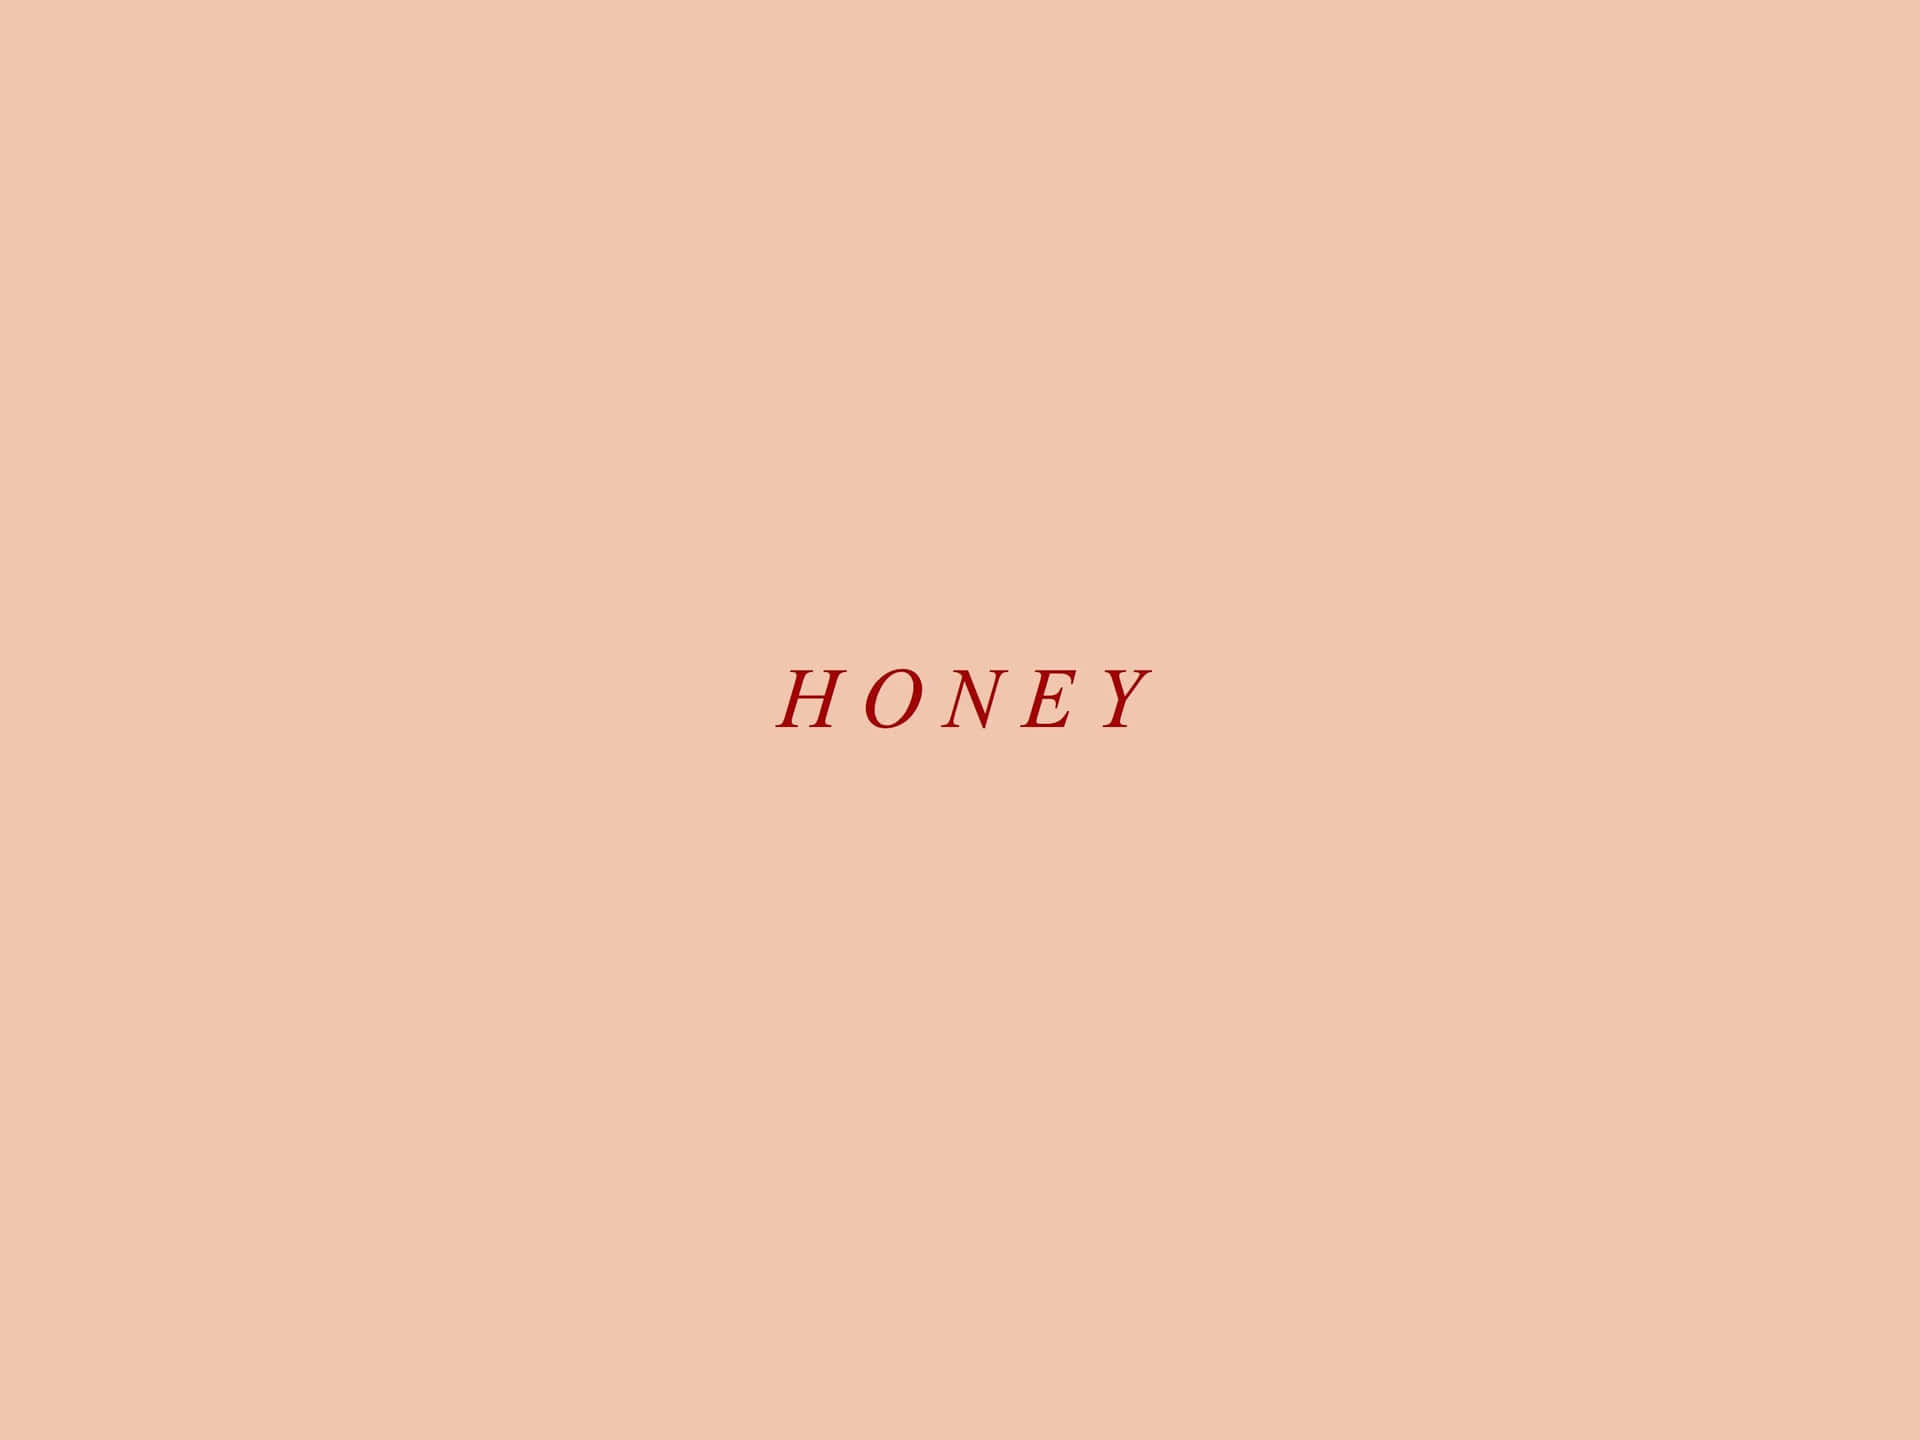 Honey - A Pink Background With The Word Honey